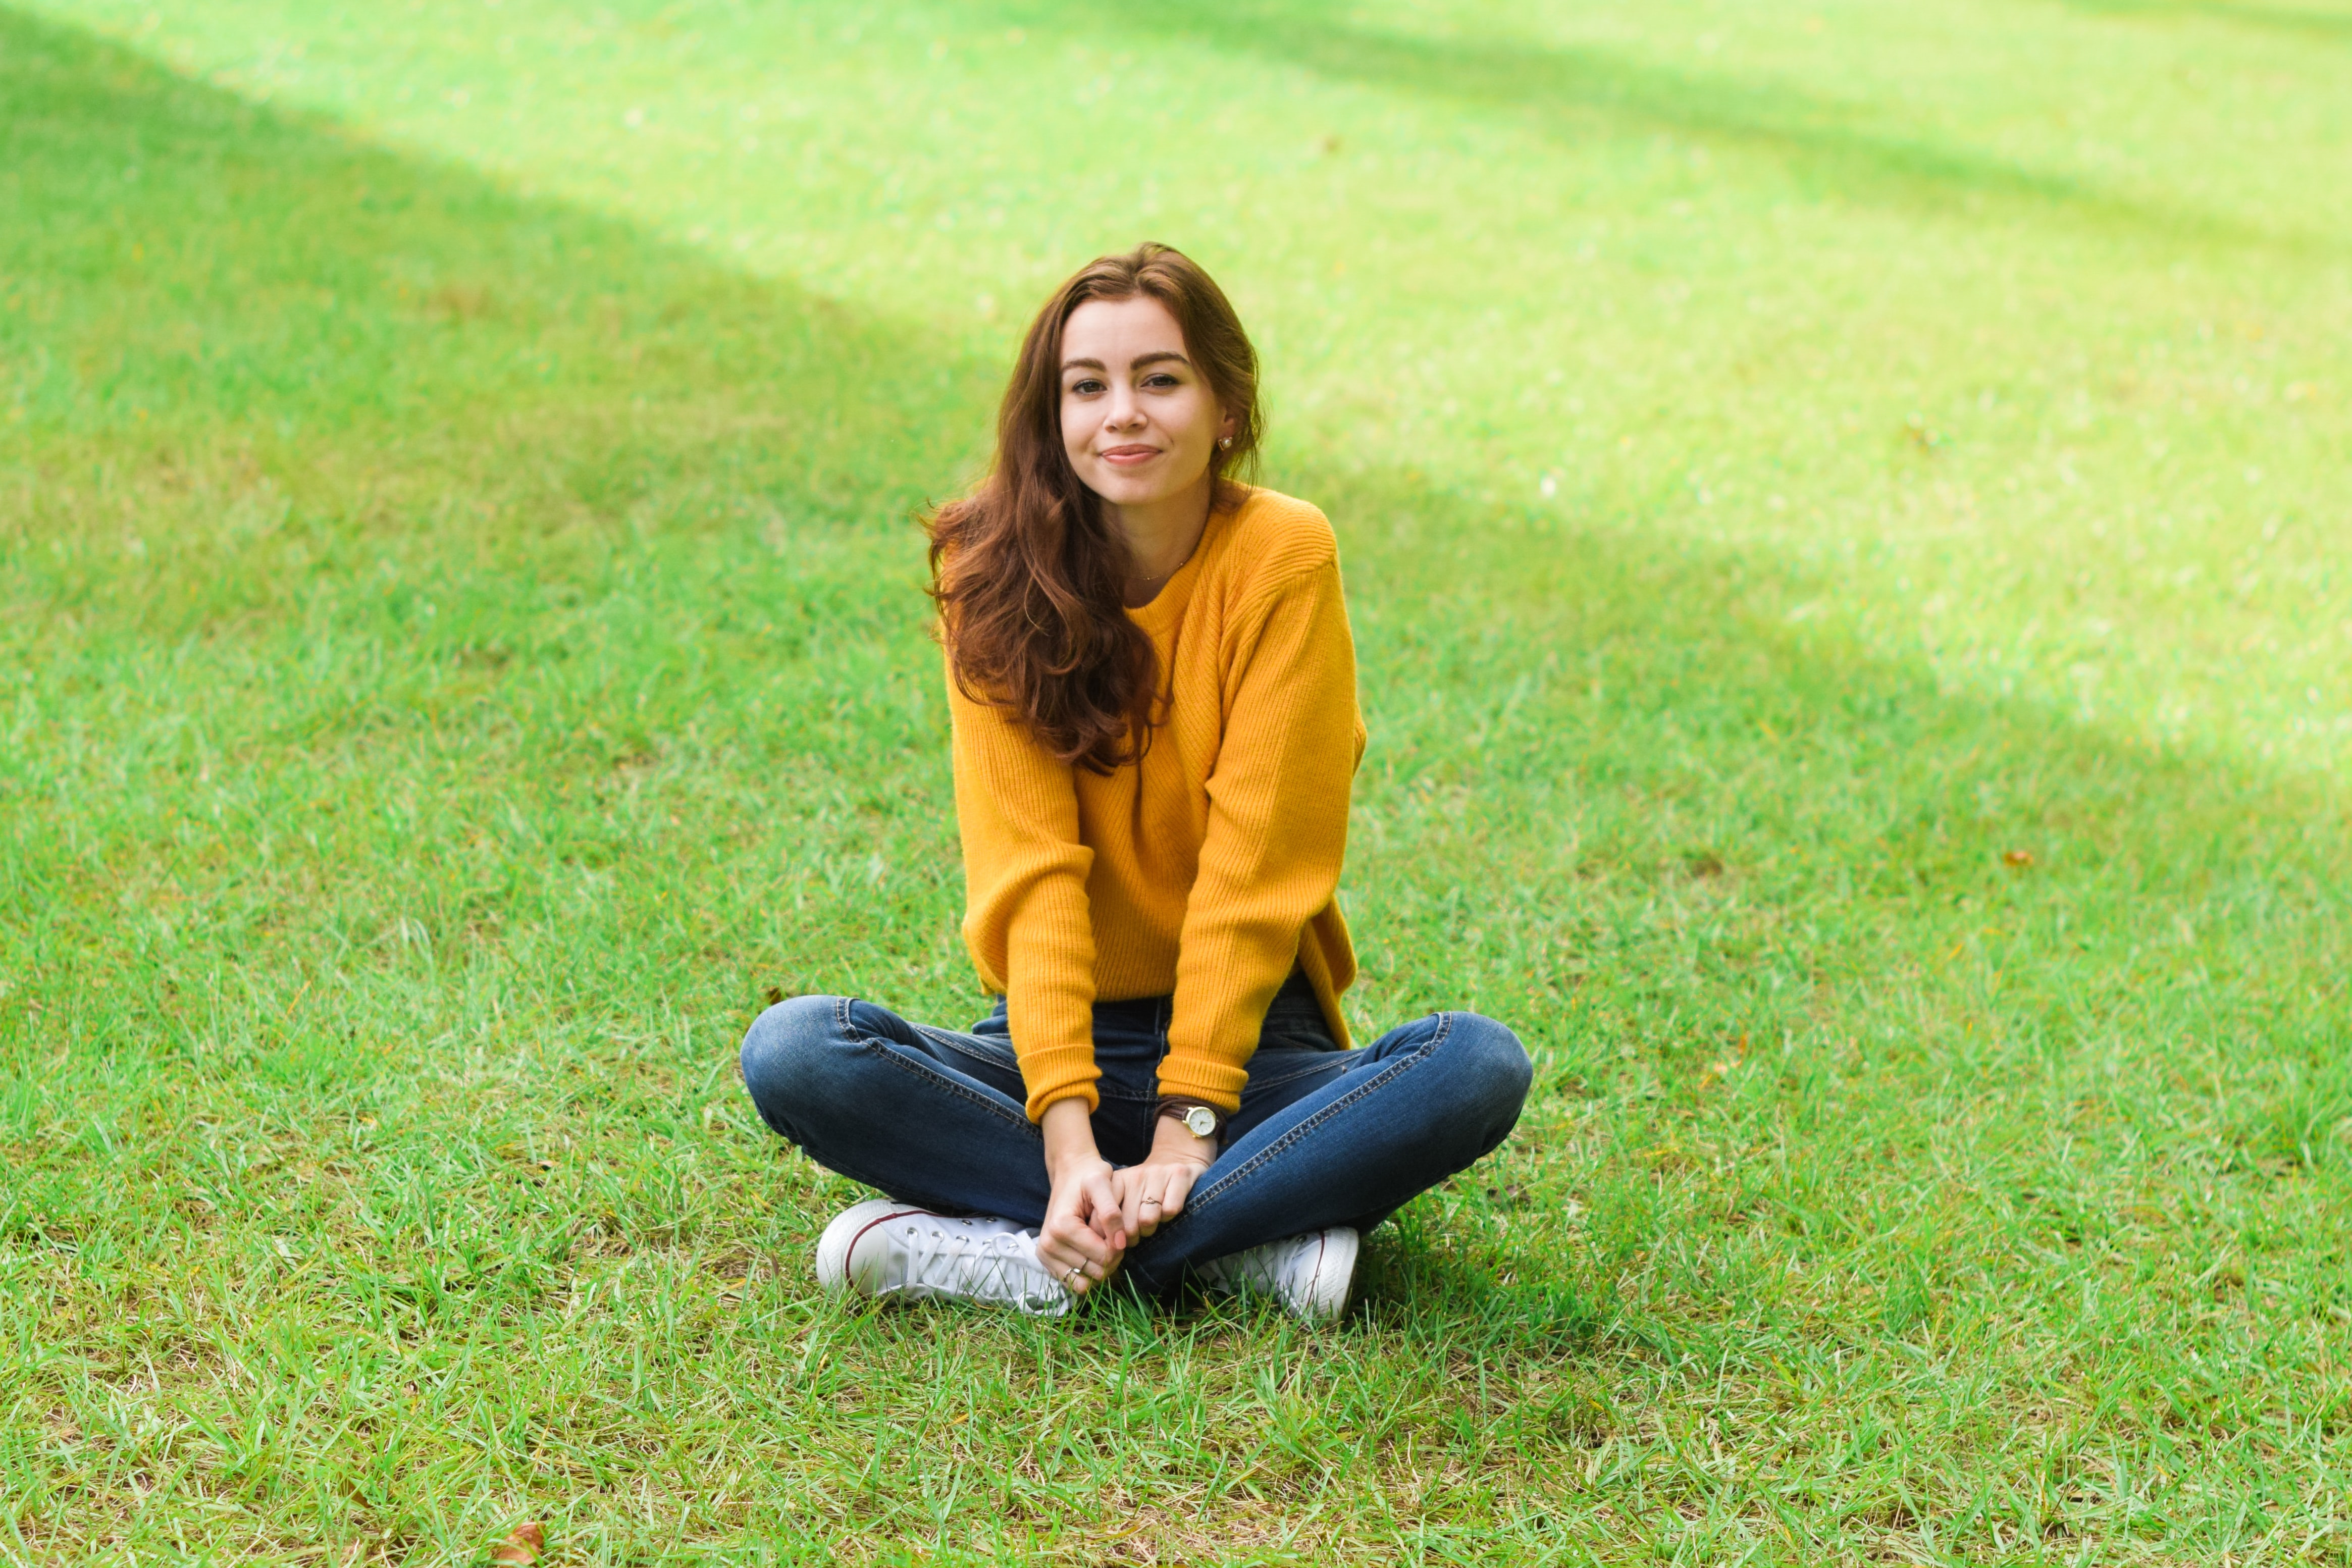 A young lady sitting cross-legged in the middle of a green lawn. She is wearing a mustard yellow sweater, blue jeans, and white sneakers.